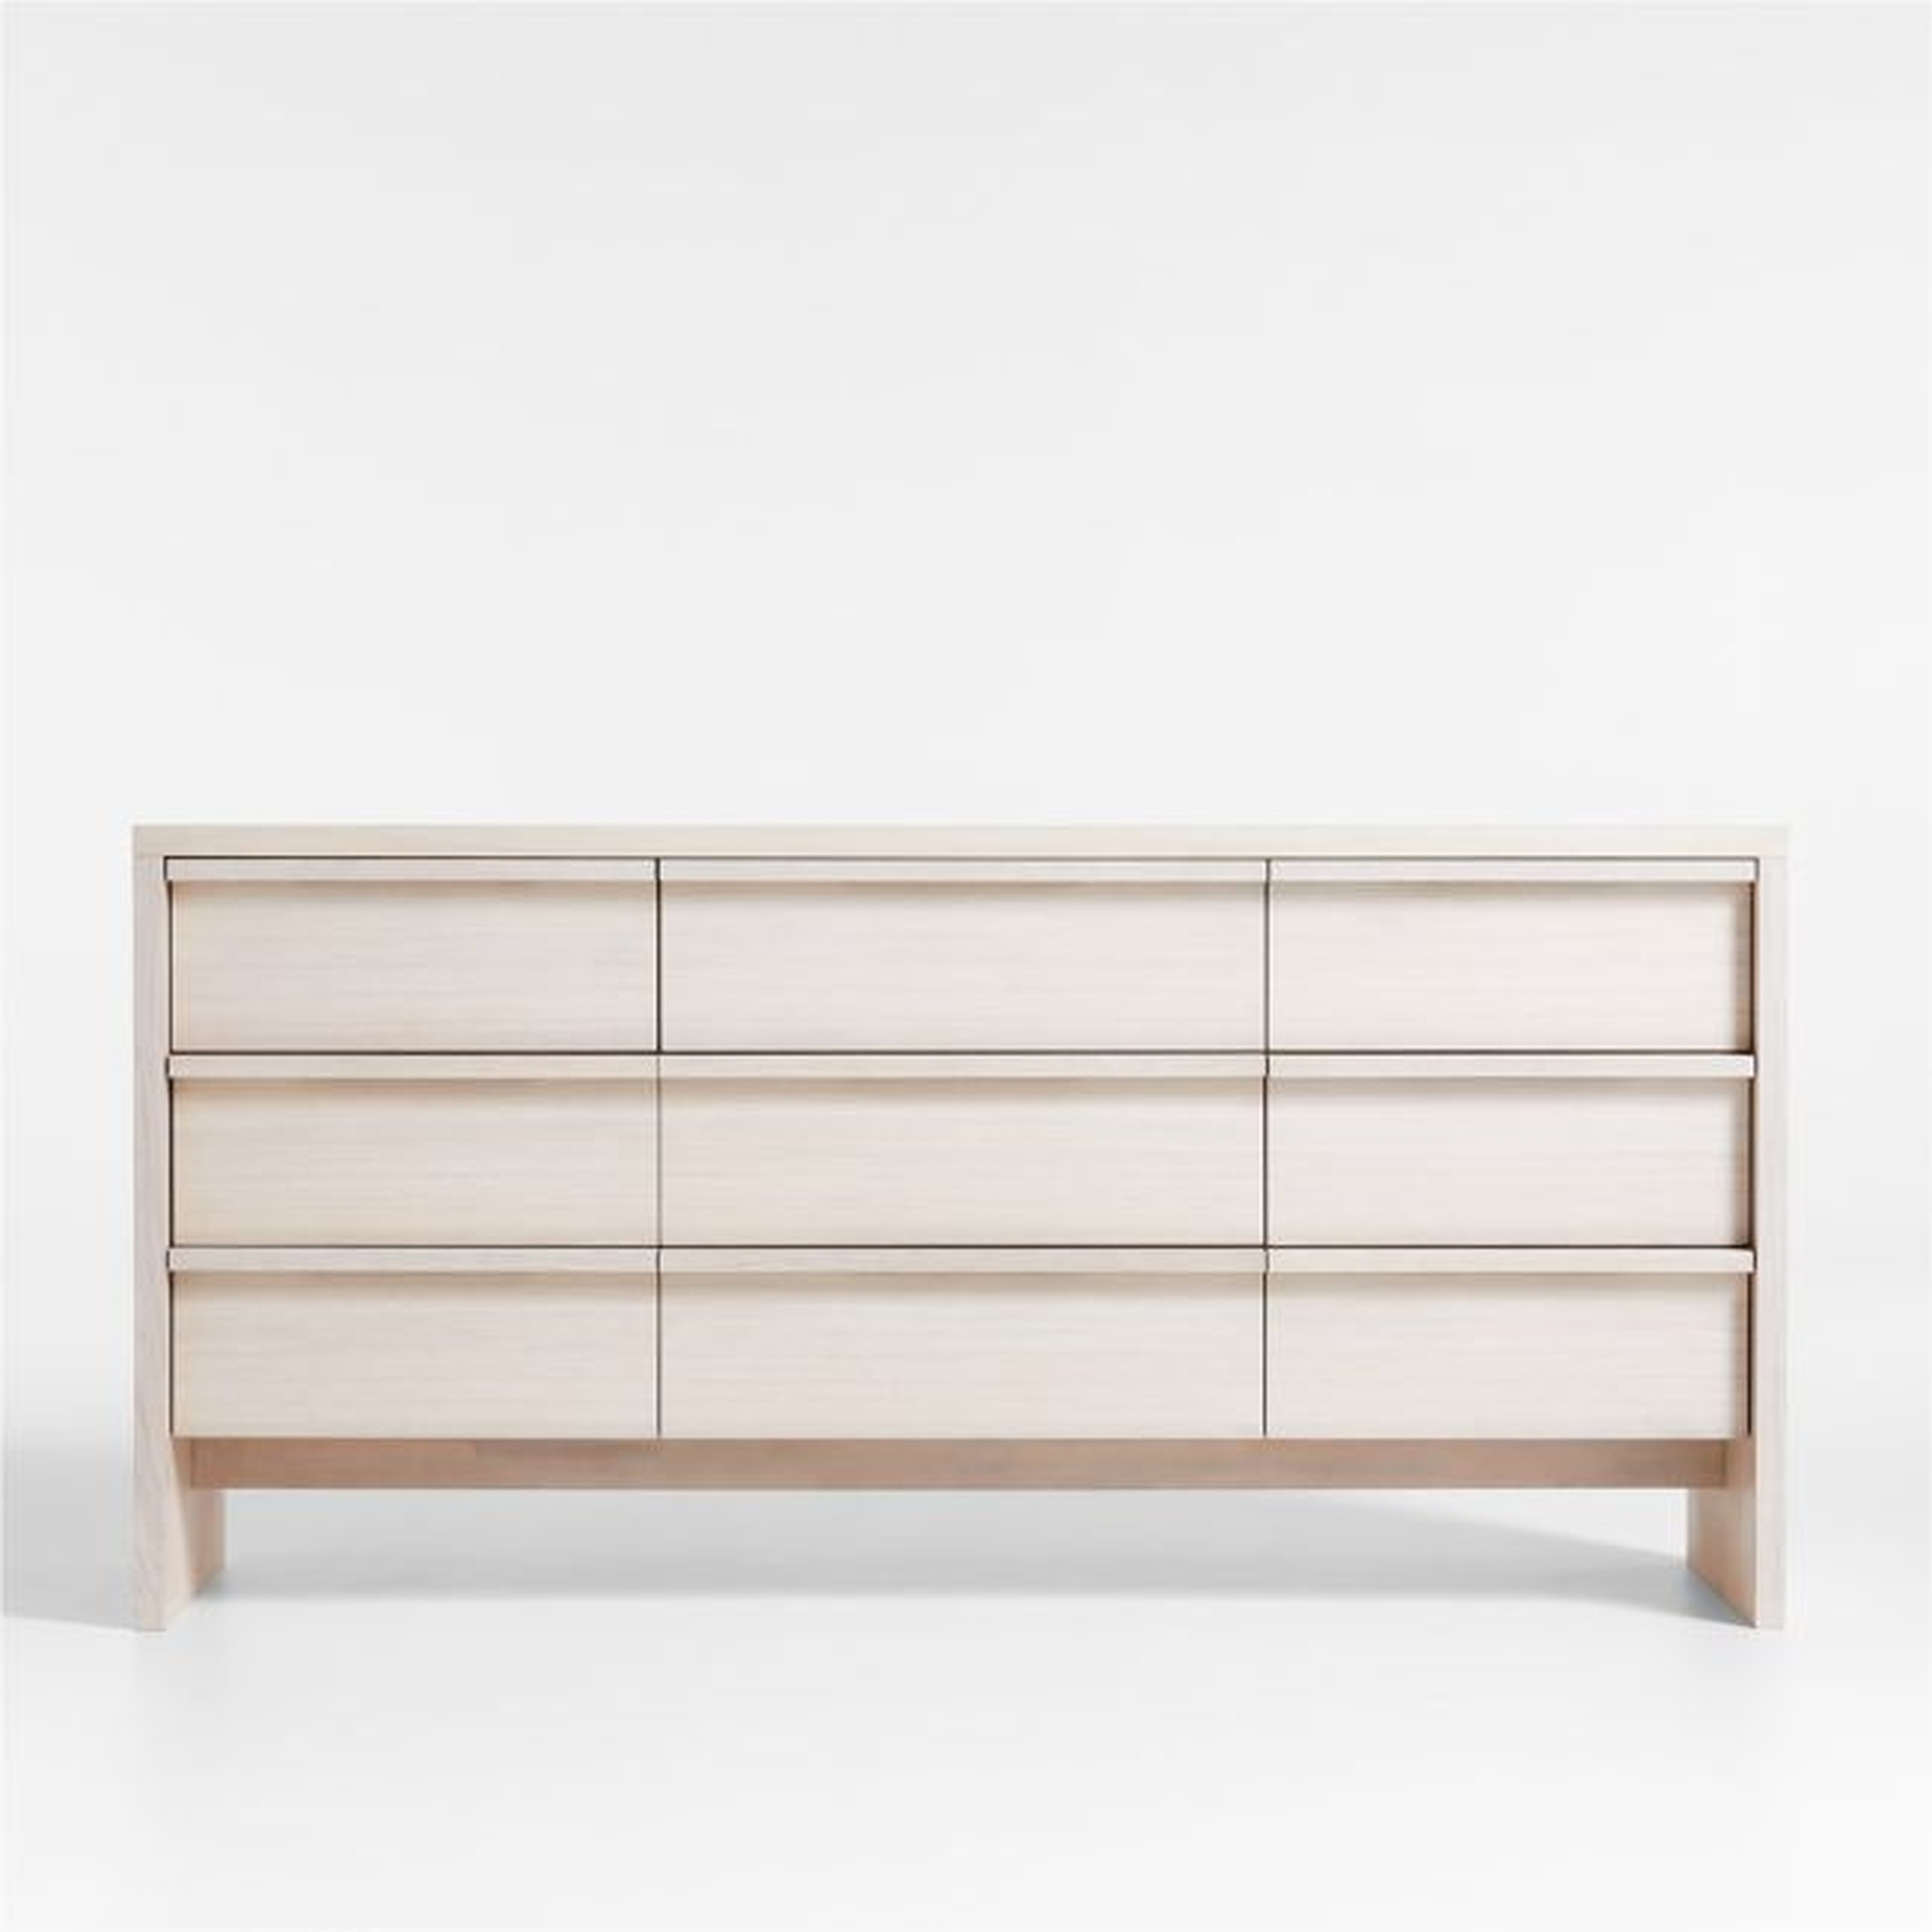 Clemente Whitewashed Ash 9-Drawer Dresser - Crate and Barrel